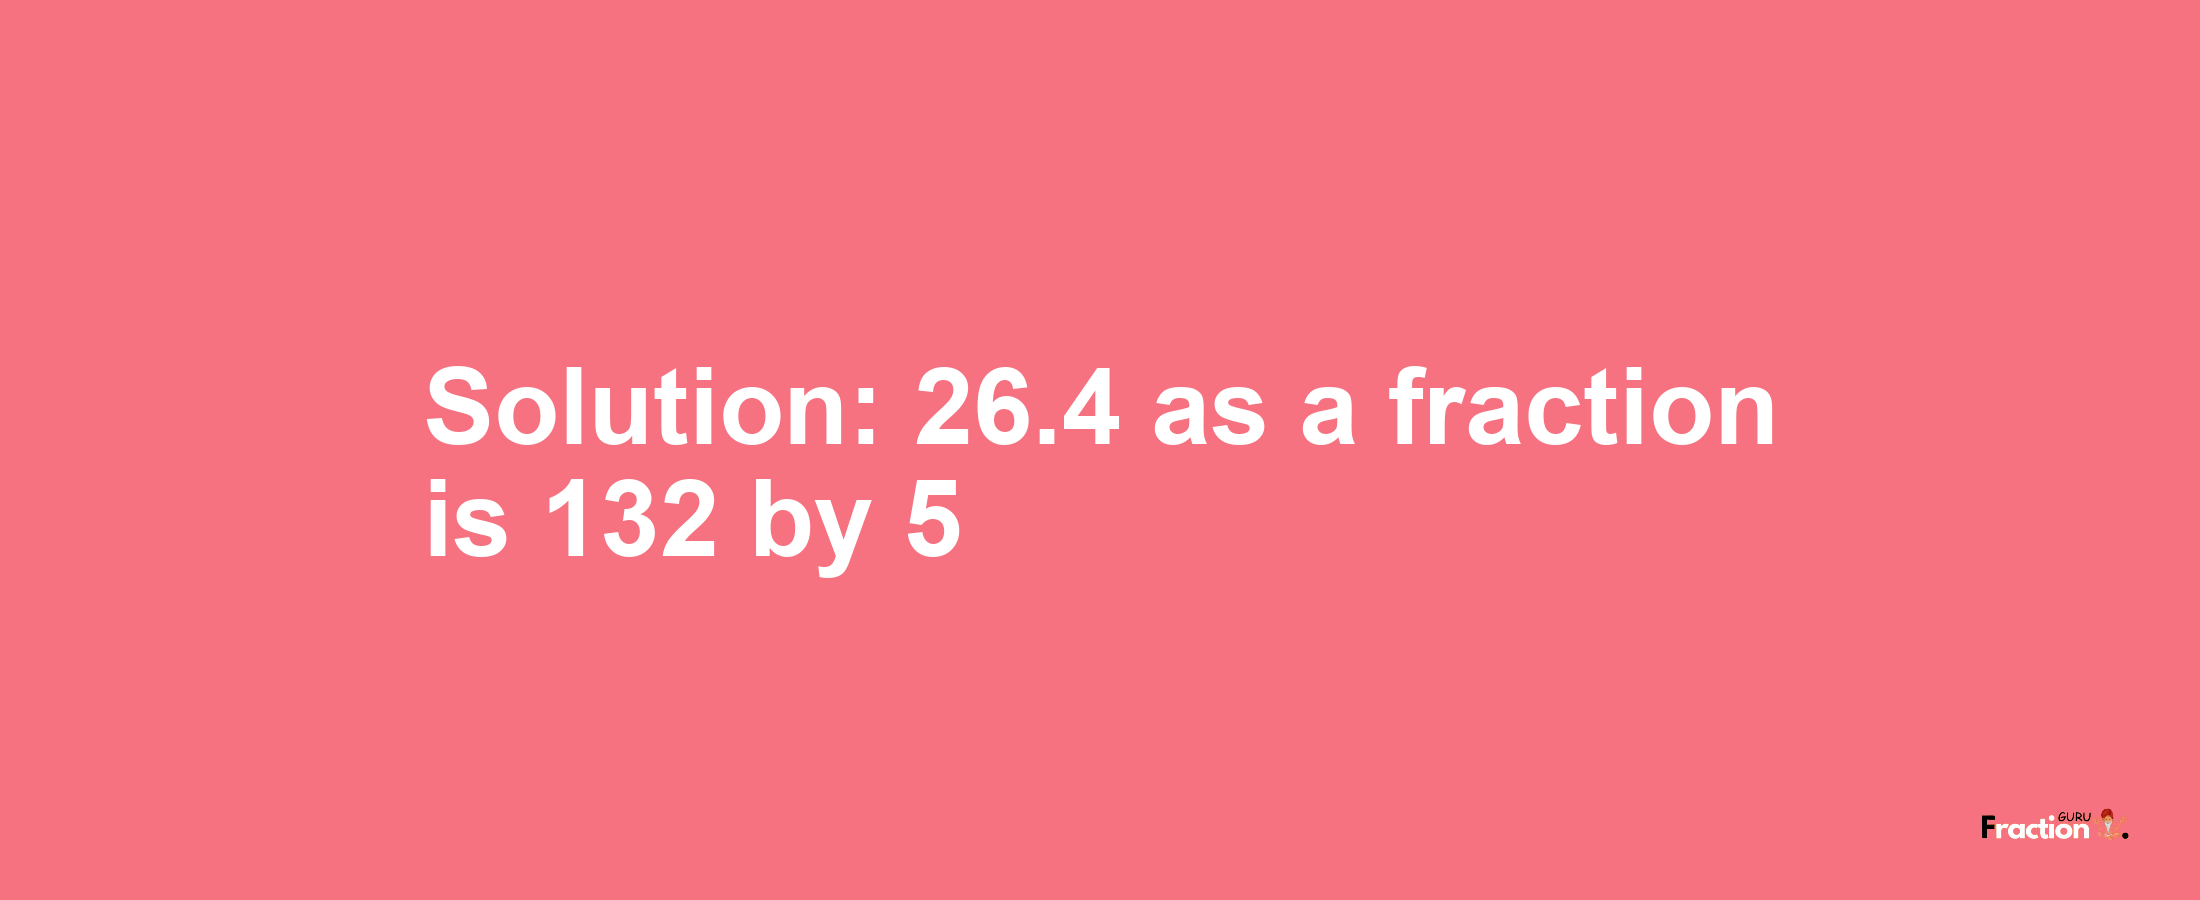 Solution:26.4 as a fraction is 132/5